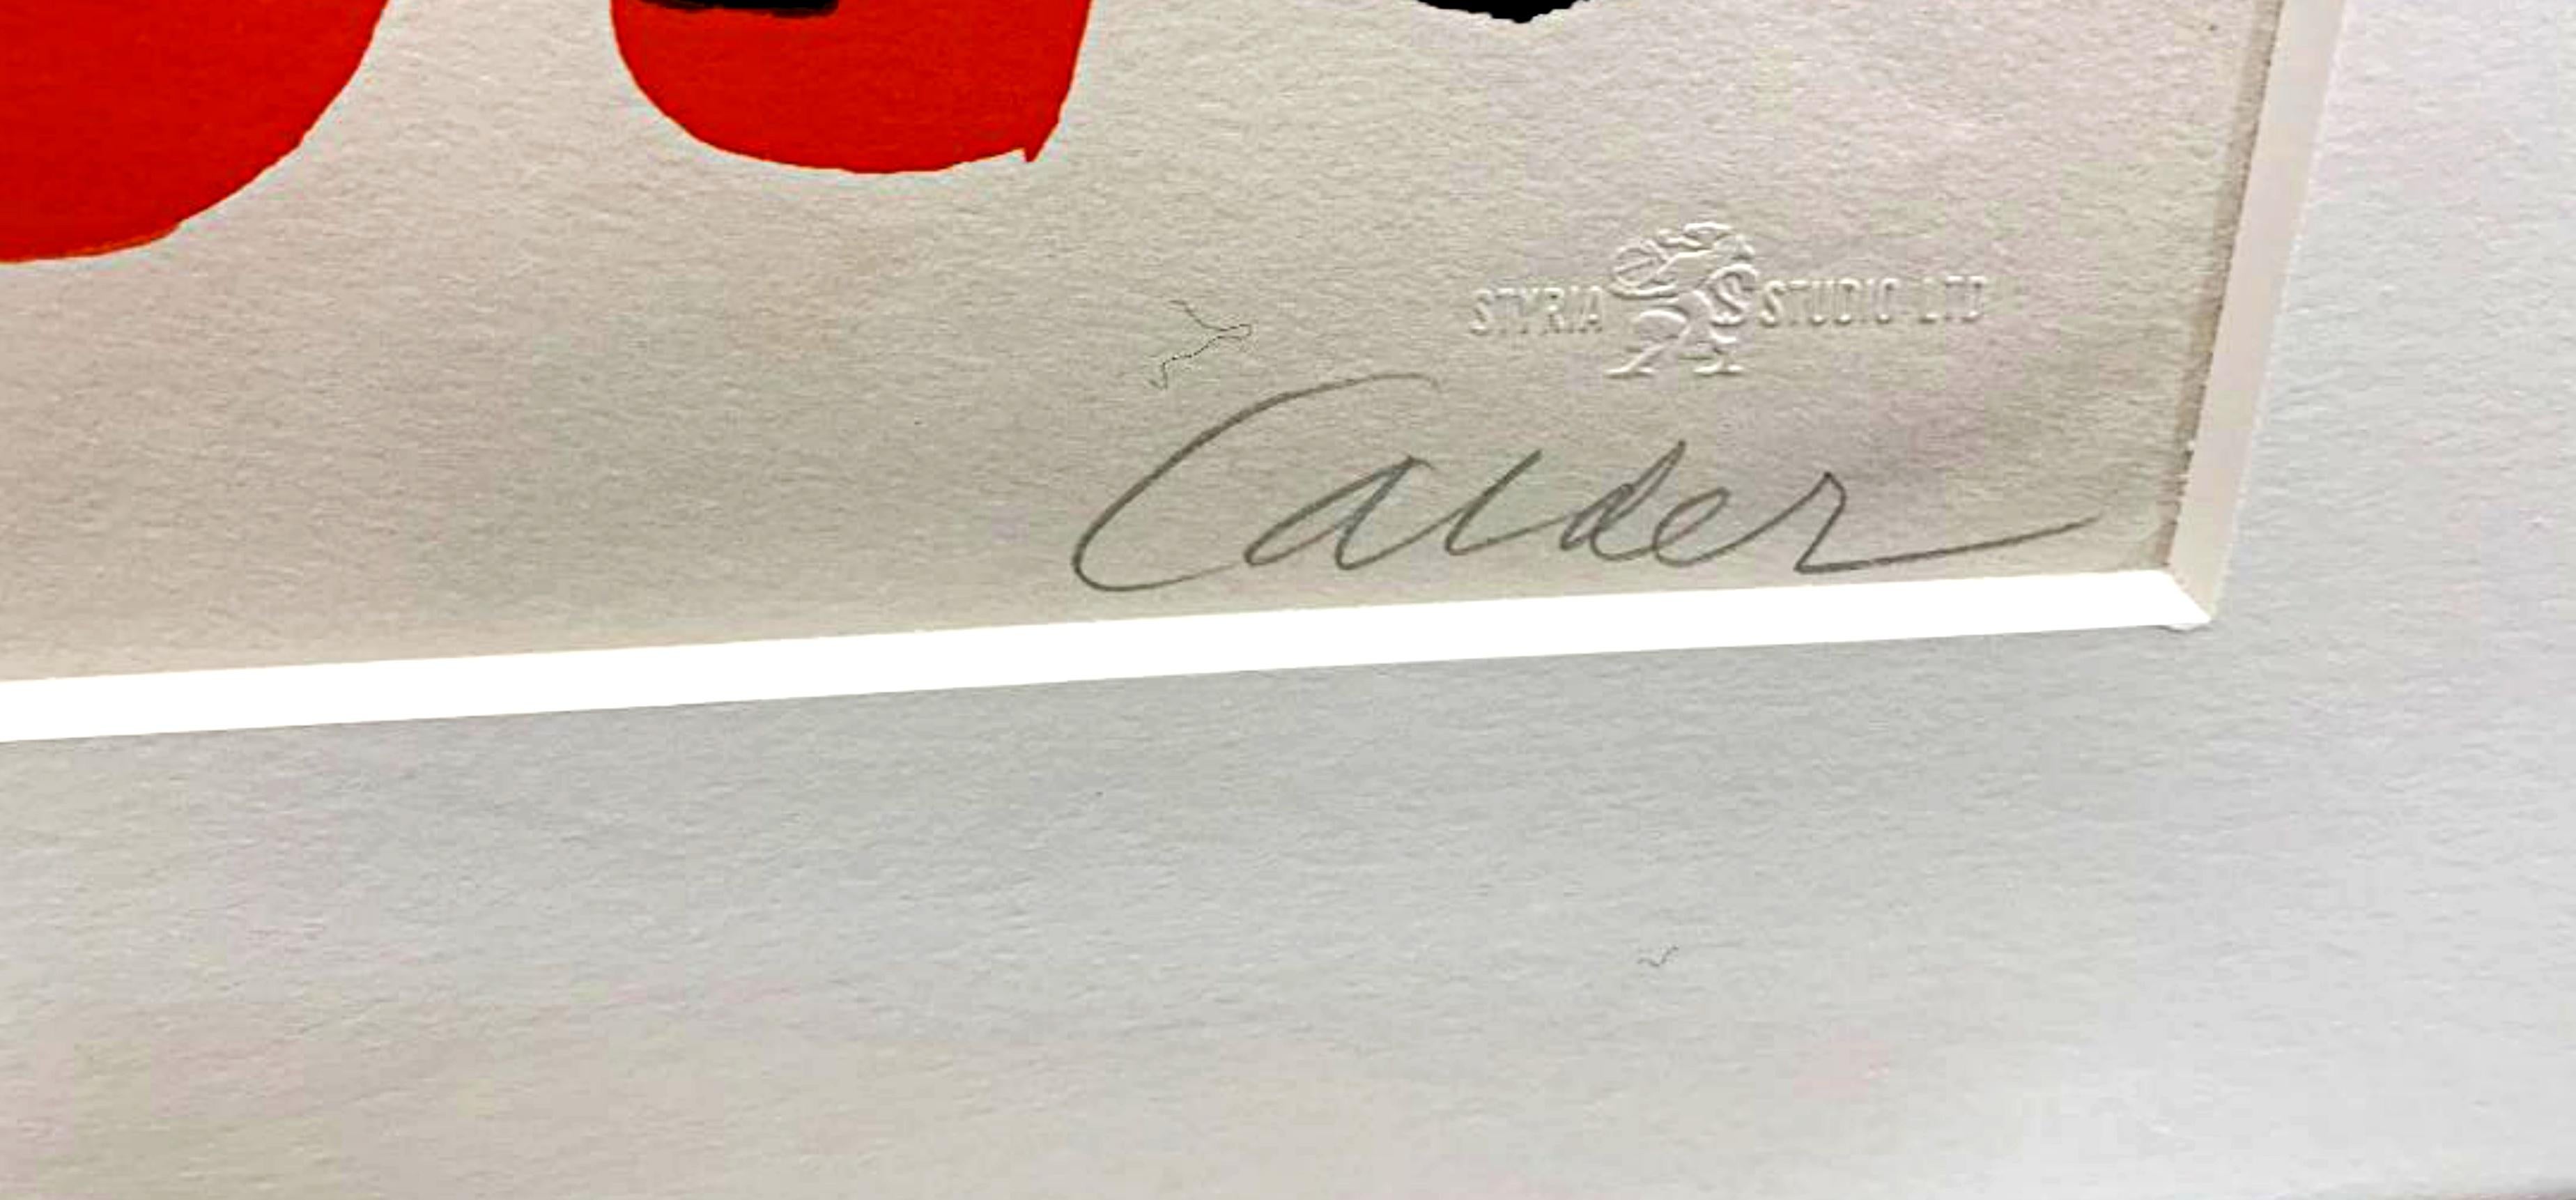 Alexander Calder
McGovern for McGovernment (Signed by BOTH Alexander Calder and George McGovern), 1972
Lithograph on wove paper with deckled edges. Hand signed and Numbered by Calder, and inscribed and signed by George McGovern. Publisher's blind